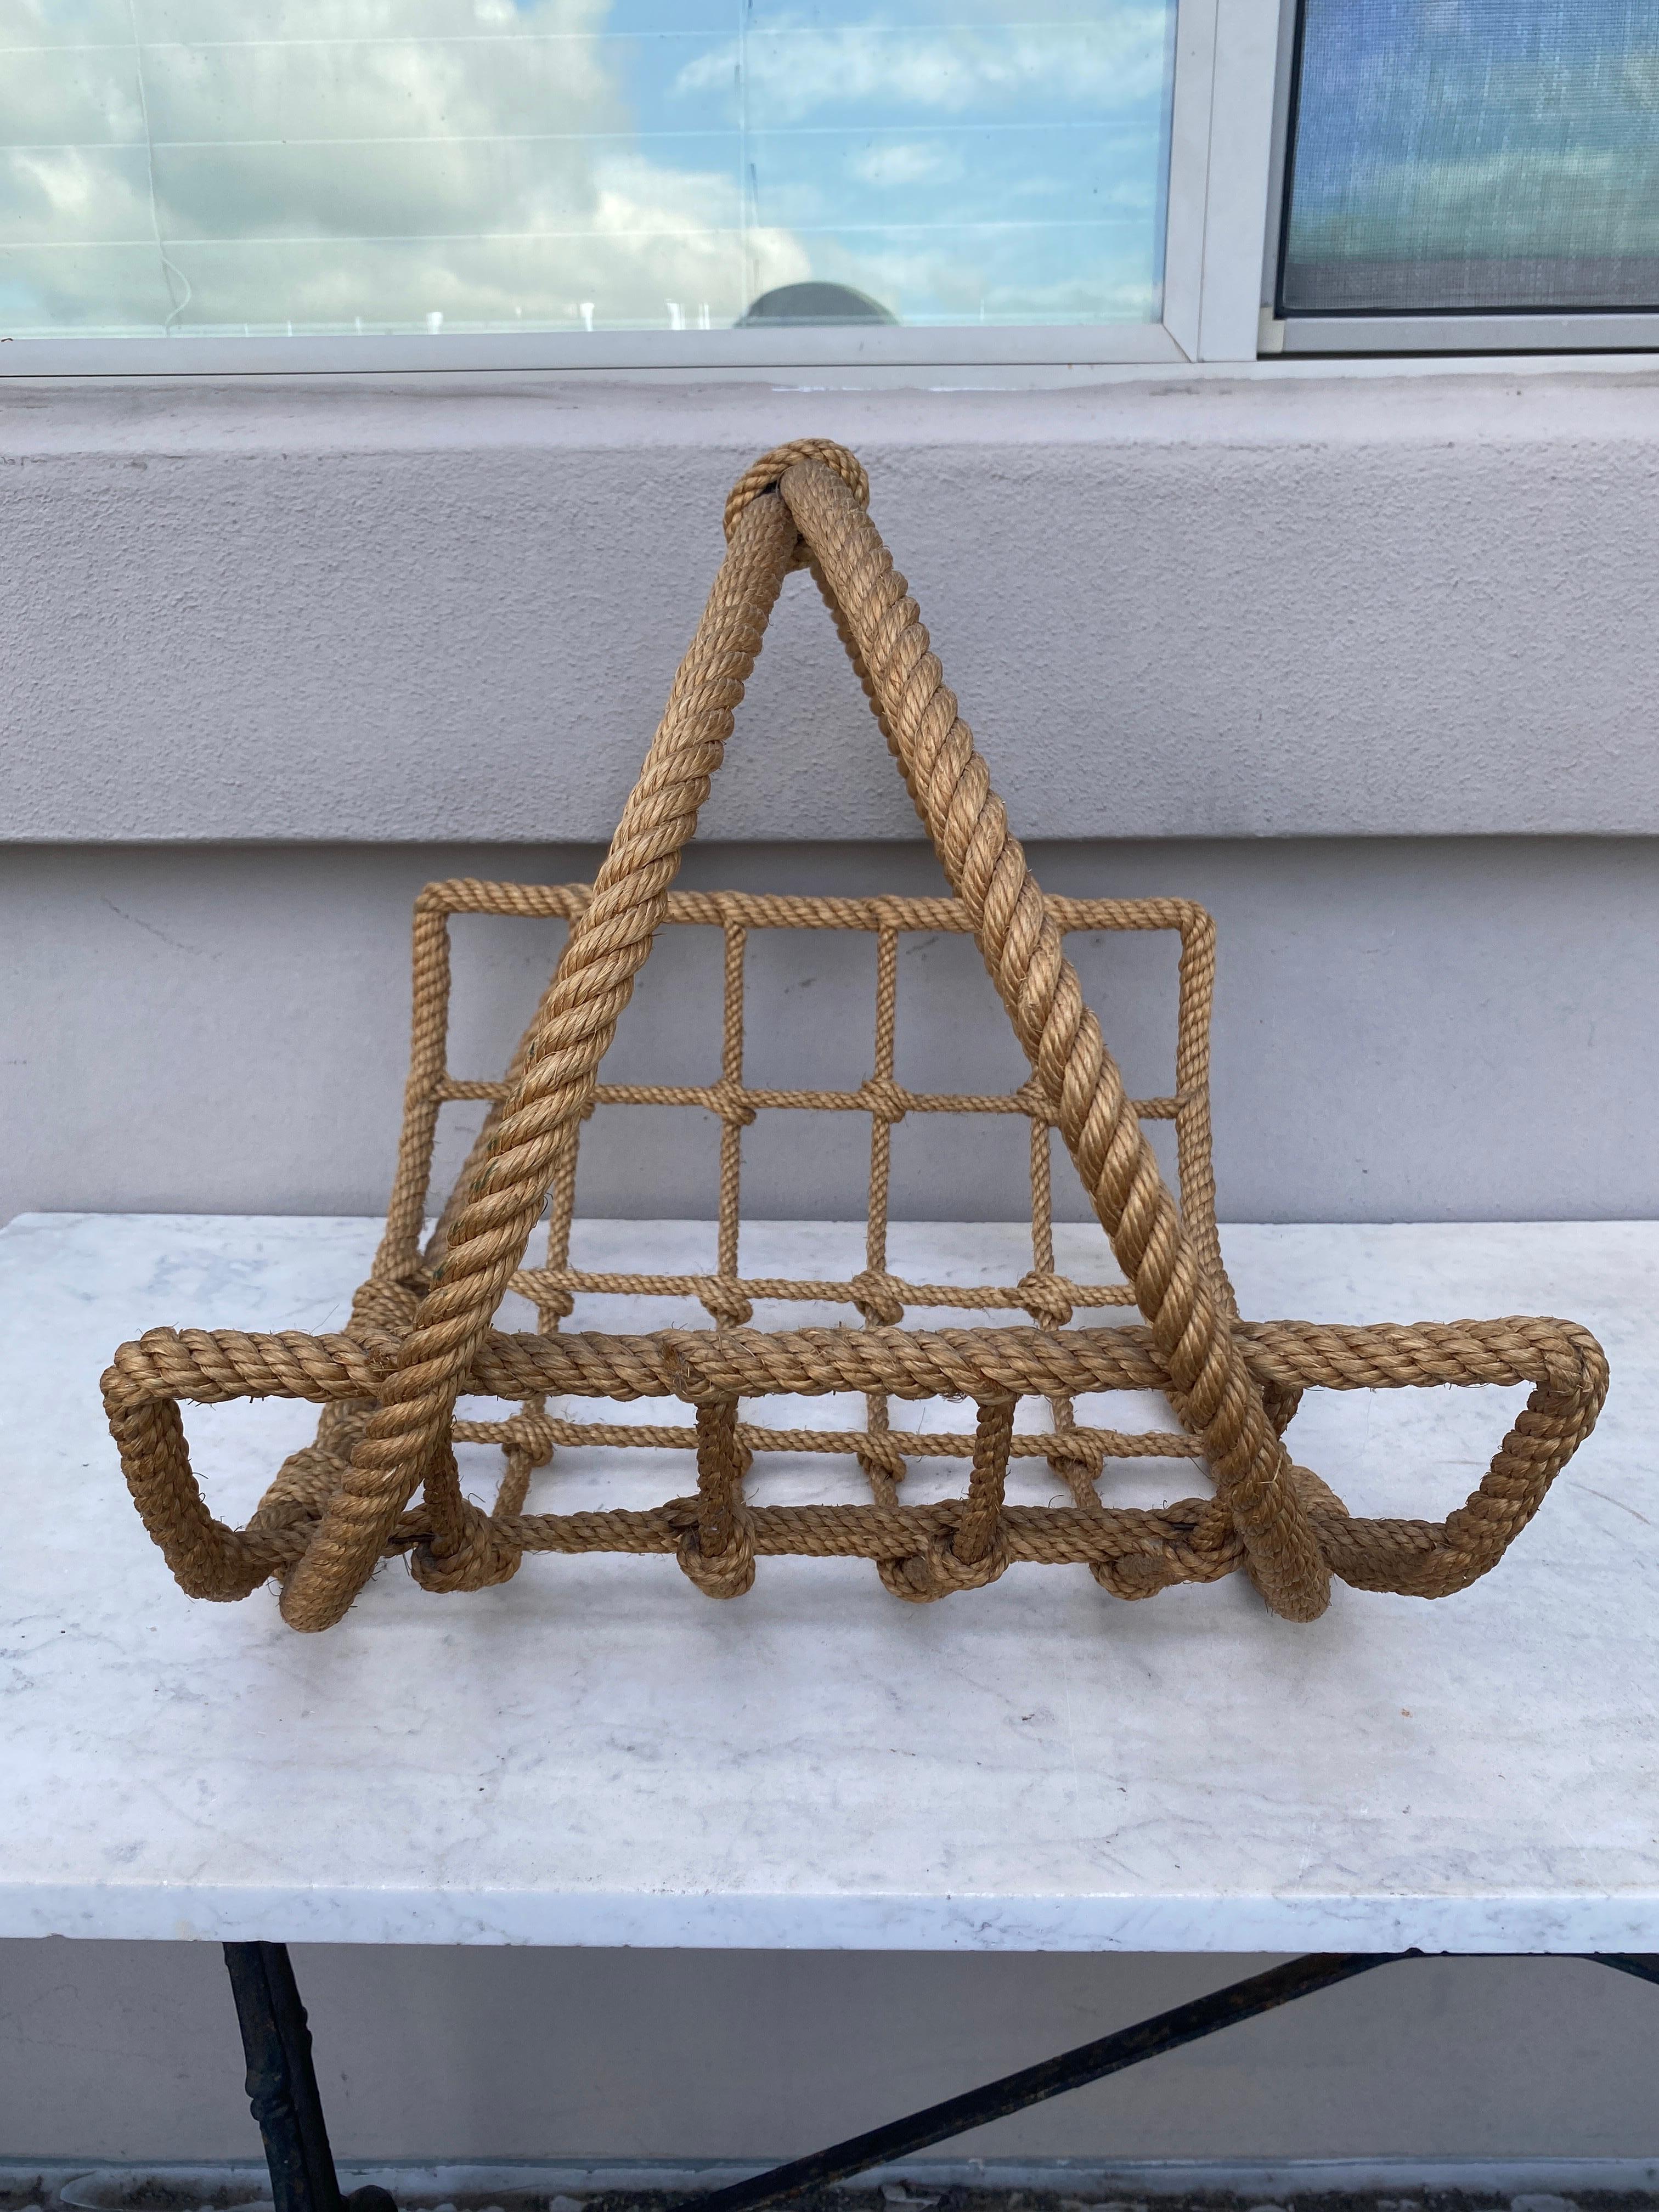 Mid-Century Rope Log Basket Adrien Audoux & Frida Minet.
H / 15 inches.
17 inches by 14.5 inches